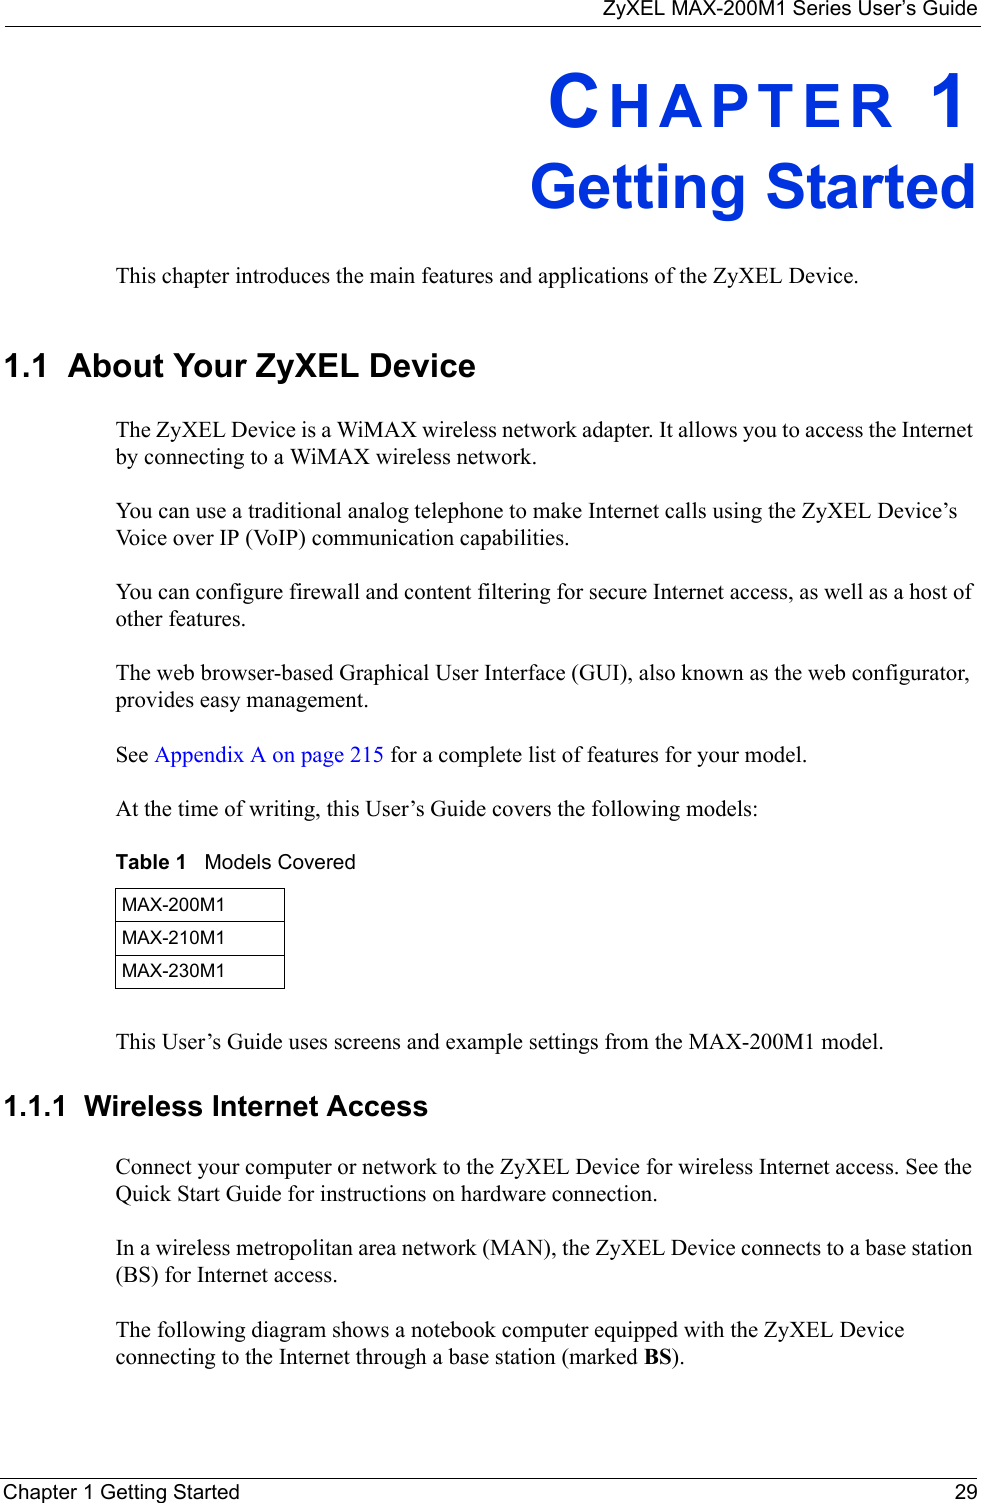 ZyXEL MAX-200M1 Series User’s GuideChapter 1 Getting Started 29CHAPTER 1Getting StartedThis chapter introduces the main features and applications of the ZyXEL Device.1.1  About Your ZyXEL Device    The ZyXEL Device is a WiMAX wireless network adapter. It allows you to access the Internet by connecting to a WiMAX wireless network. You can use a traditional analog telephone to make Internet calls using the ZyXEL Device’s Voice over IP (VoIP) communication capabilities. You can configure firewall and content filtering for secure Internet access, as well as a host of other features. The web browser-based Graphical User Interface (GUI), also known as the web configurator, provides easy management.See Appendix A on page 215 for a complete list of features for your model.At the time of writing, this User’s Guide covers the following models:This User’s Guide uses screens and example settings from the MAX-200M1 model.1.1.1  Wireless Internet AccessConnect your computer or network to the ZyXEL Device for wireless Internet access. See the Quick Start Guide for instructions on hardware connection.In a wireless metropolitan area network (MAN), the ZyXEL Device connects to a base station (BS) for Internet access. The following diagram shows a notebook computer equipped with the ZyXEL Device connecting to the Internet through a base station (marked BS).Table 1   Models CoveredMAX-200M1MAX-210M1MAX-230M1